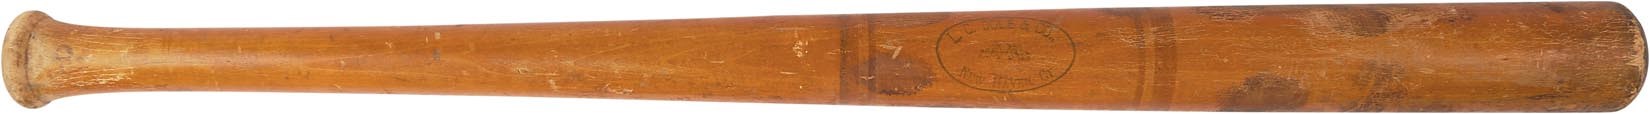 Early Baseball - 1880s L.C. Dole Bat Used by Samuel M. Chase